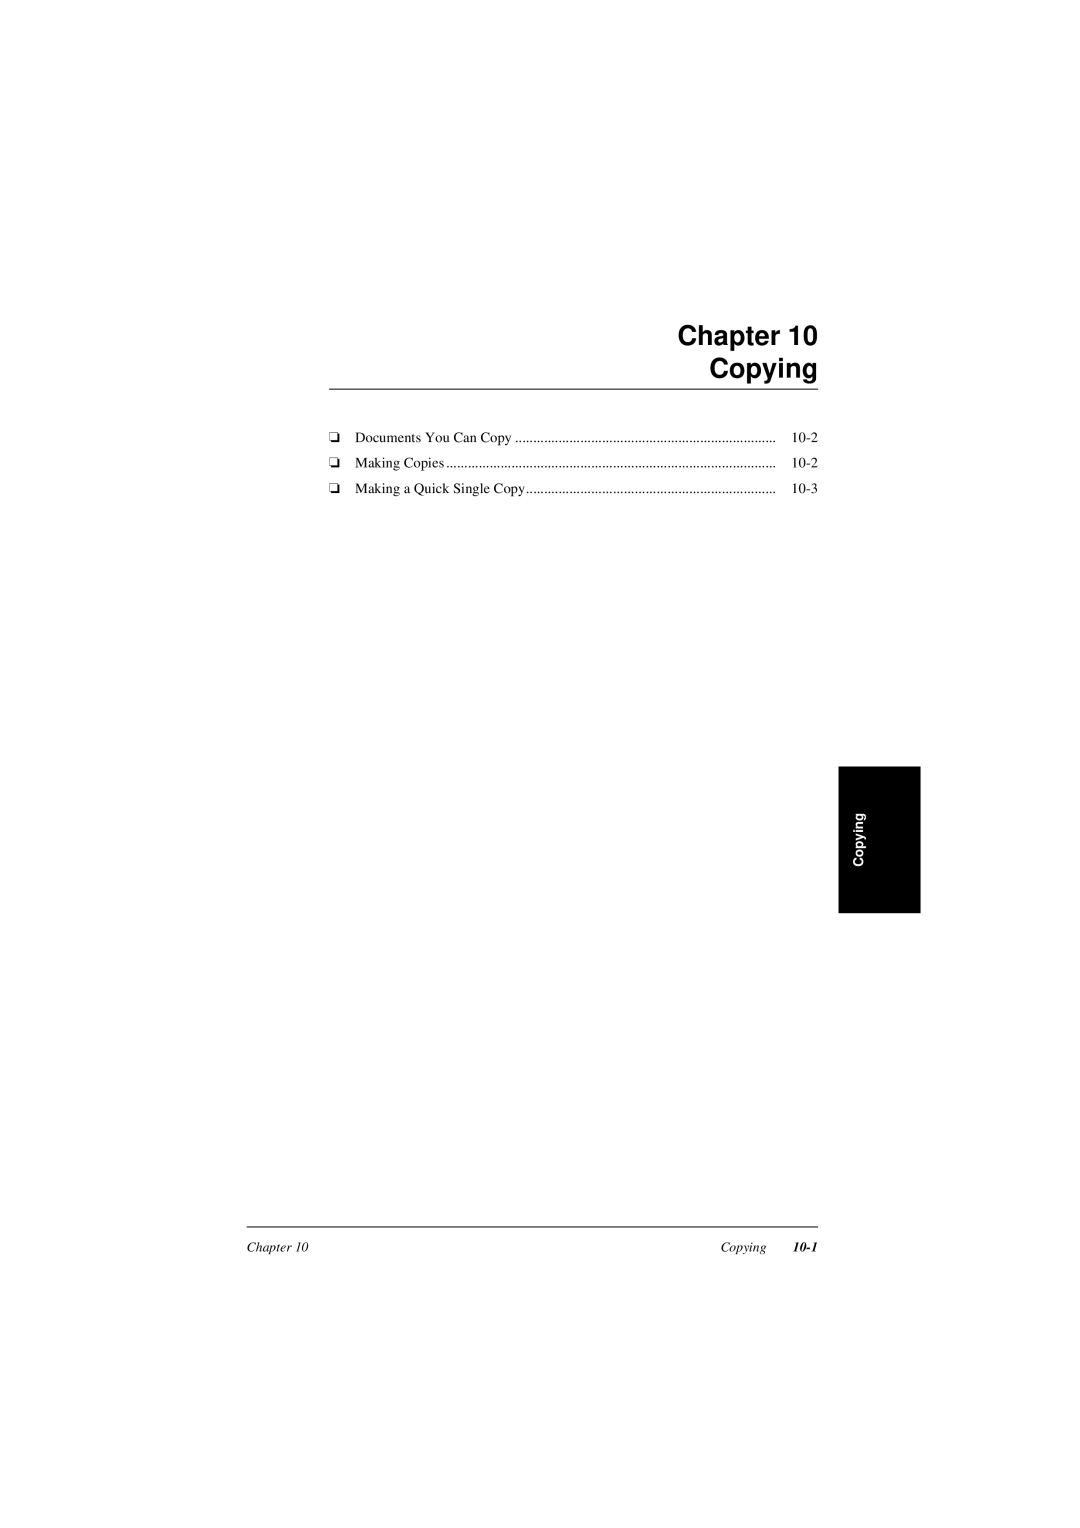 Canon L240, L290 manual Copying, Chapter, 10-1, Documents You Can Copy, Making Copies, Making a Quick Single Copy 